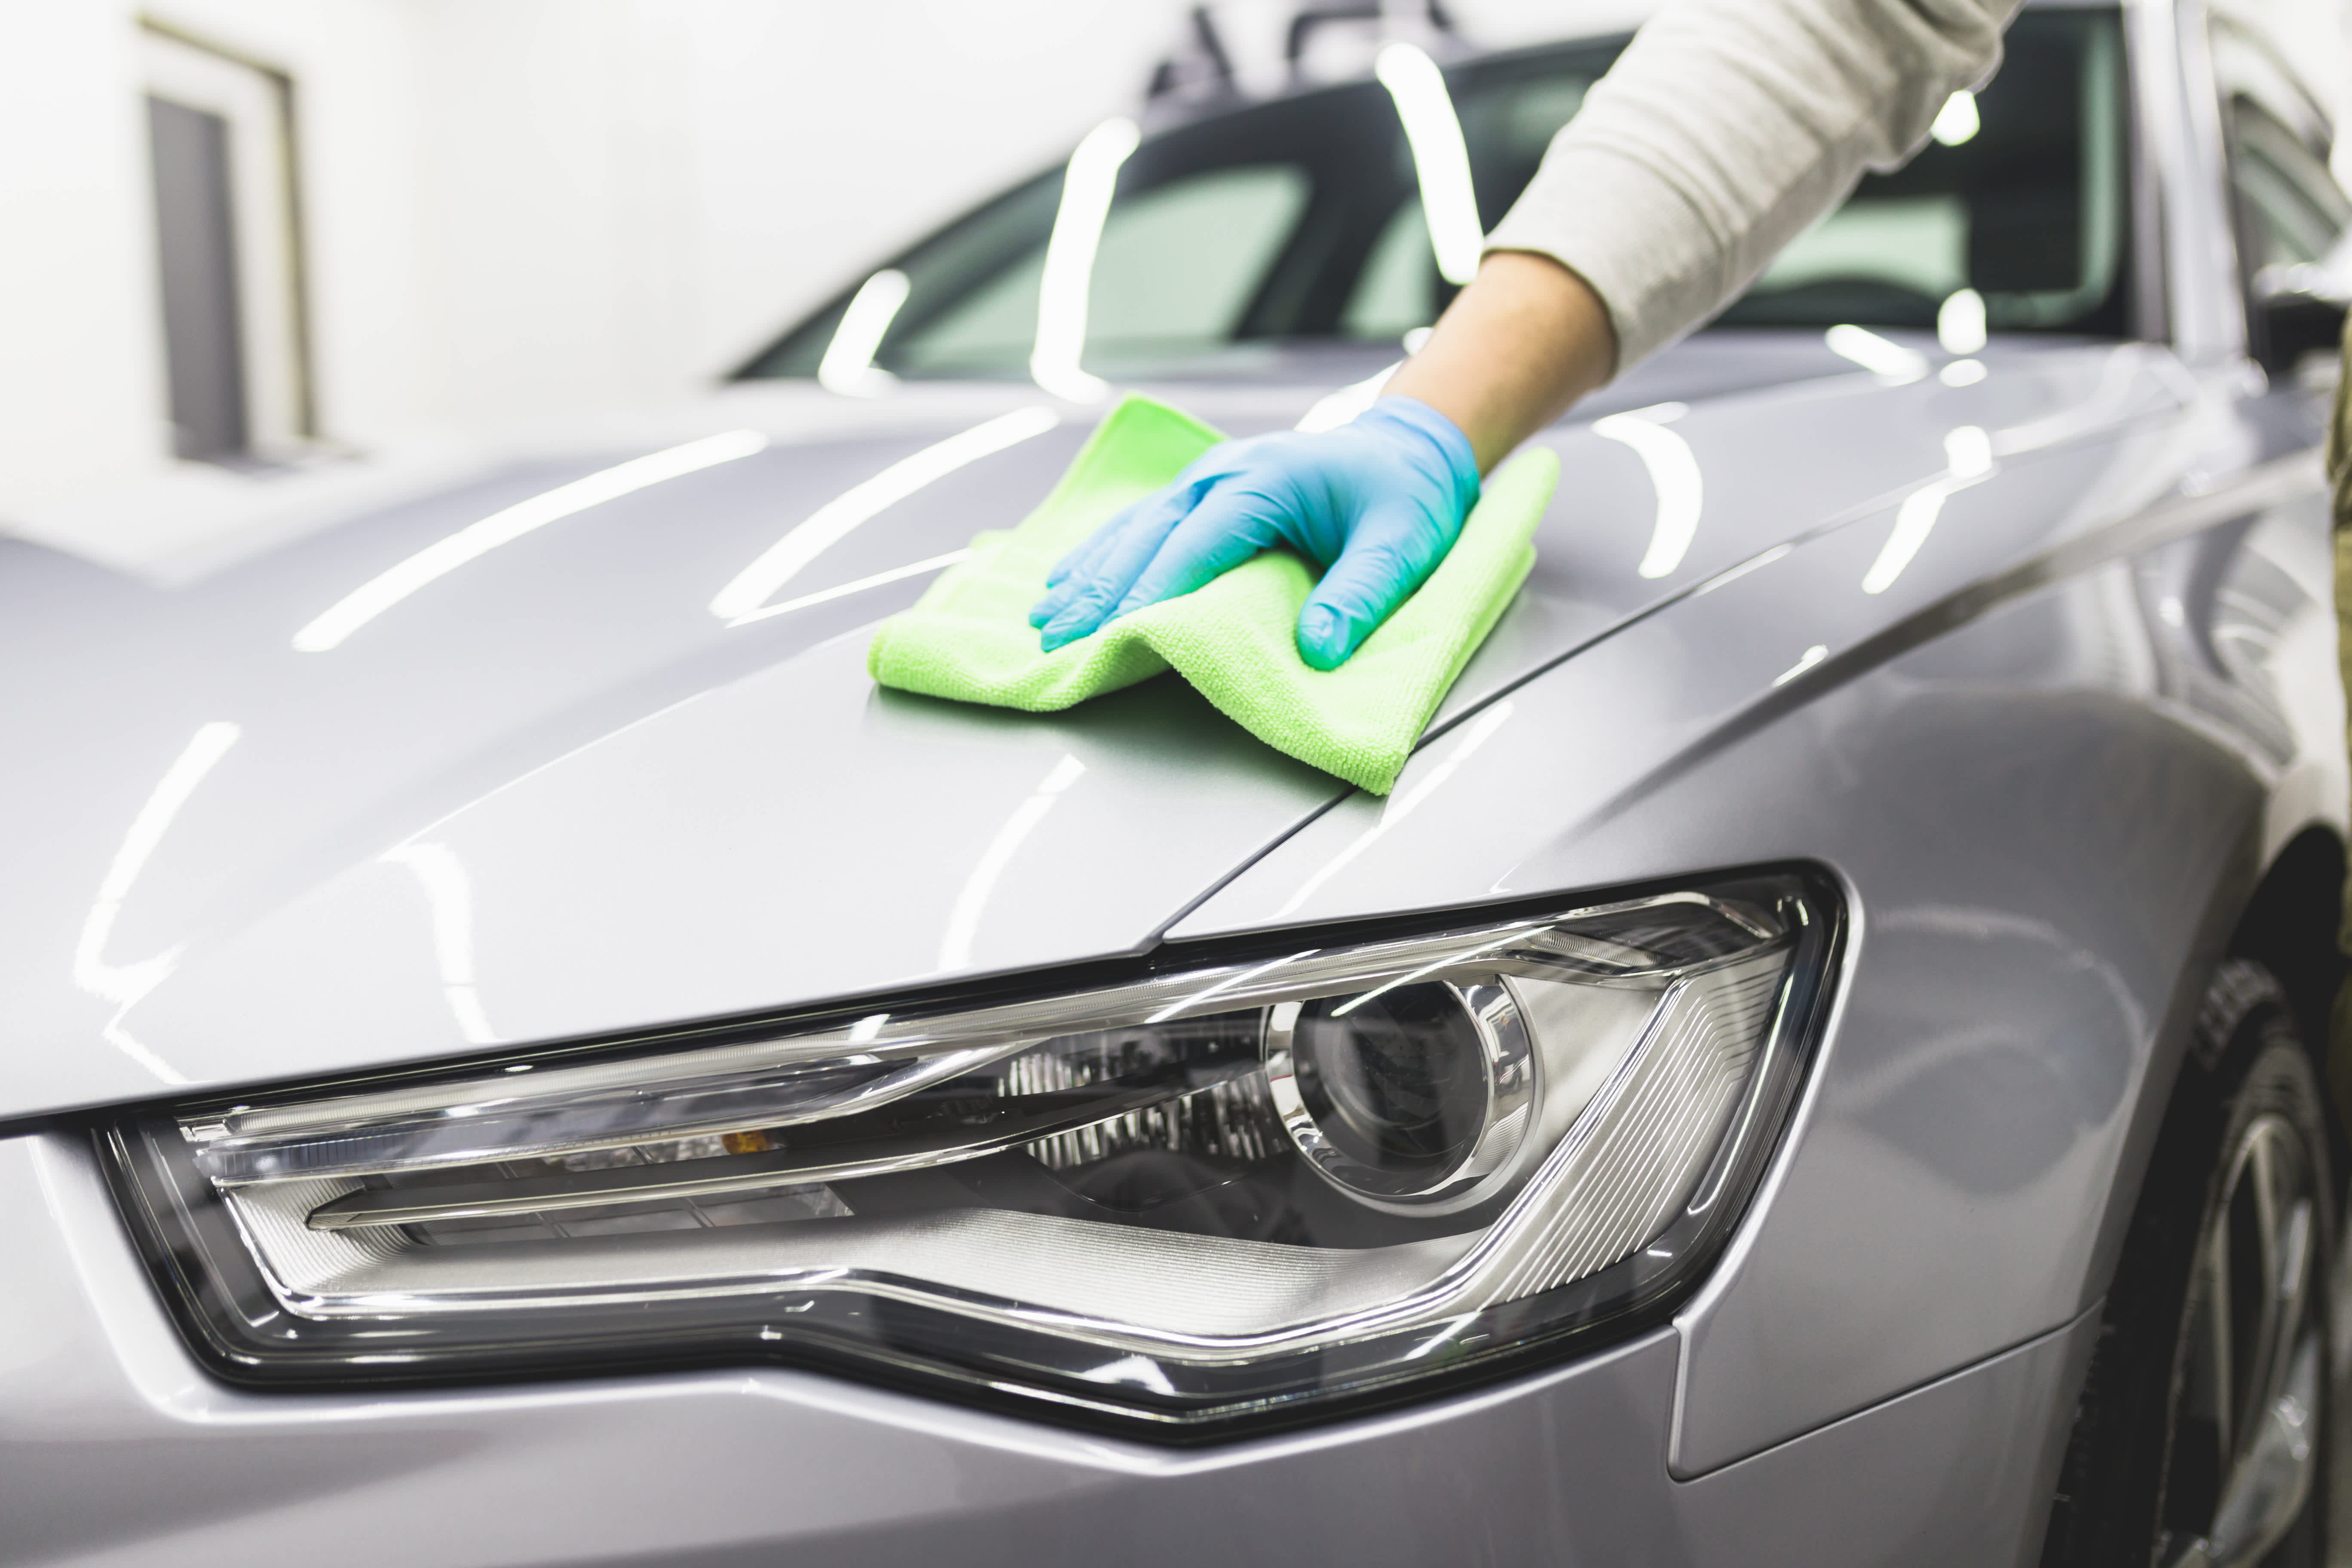 How to Properly Maintain a Ceramic Coated Car